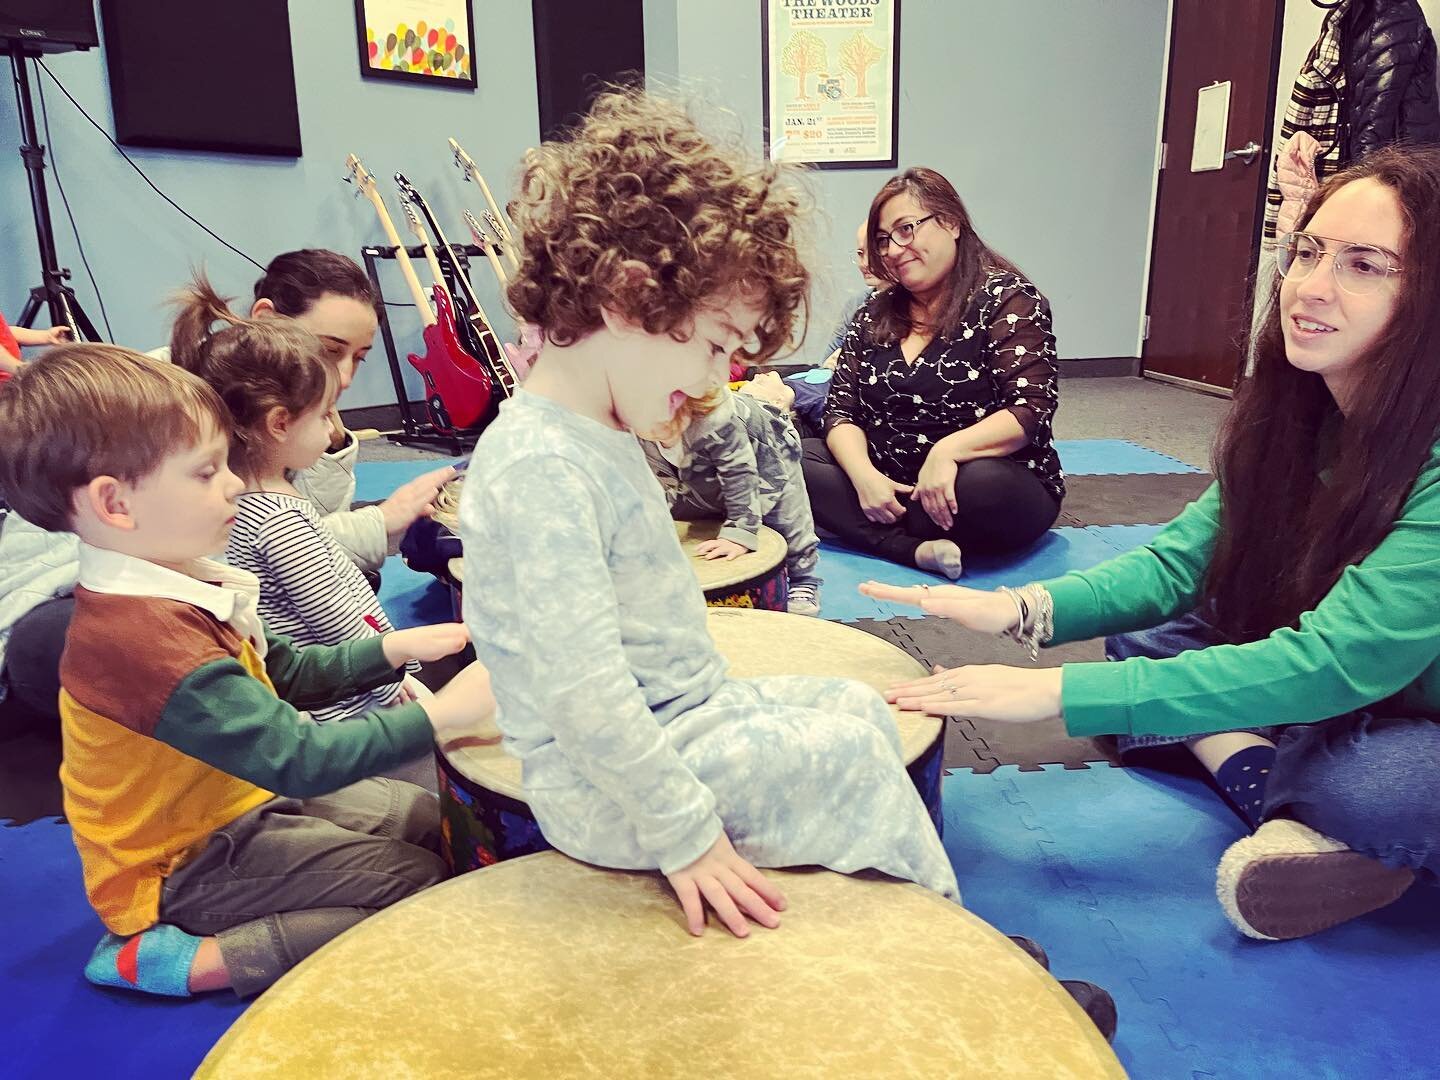 Feel the beat! Young ones love to feel the drumming all over their body, one way to do it is to sit down on a drum while other friends are engaged in percussion! How do you let your kids experiment with sound? #lakehousemusicacademy #lakehouselollies